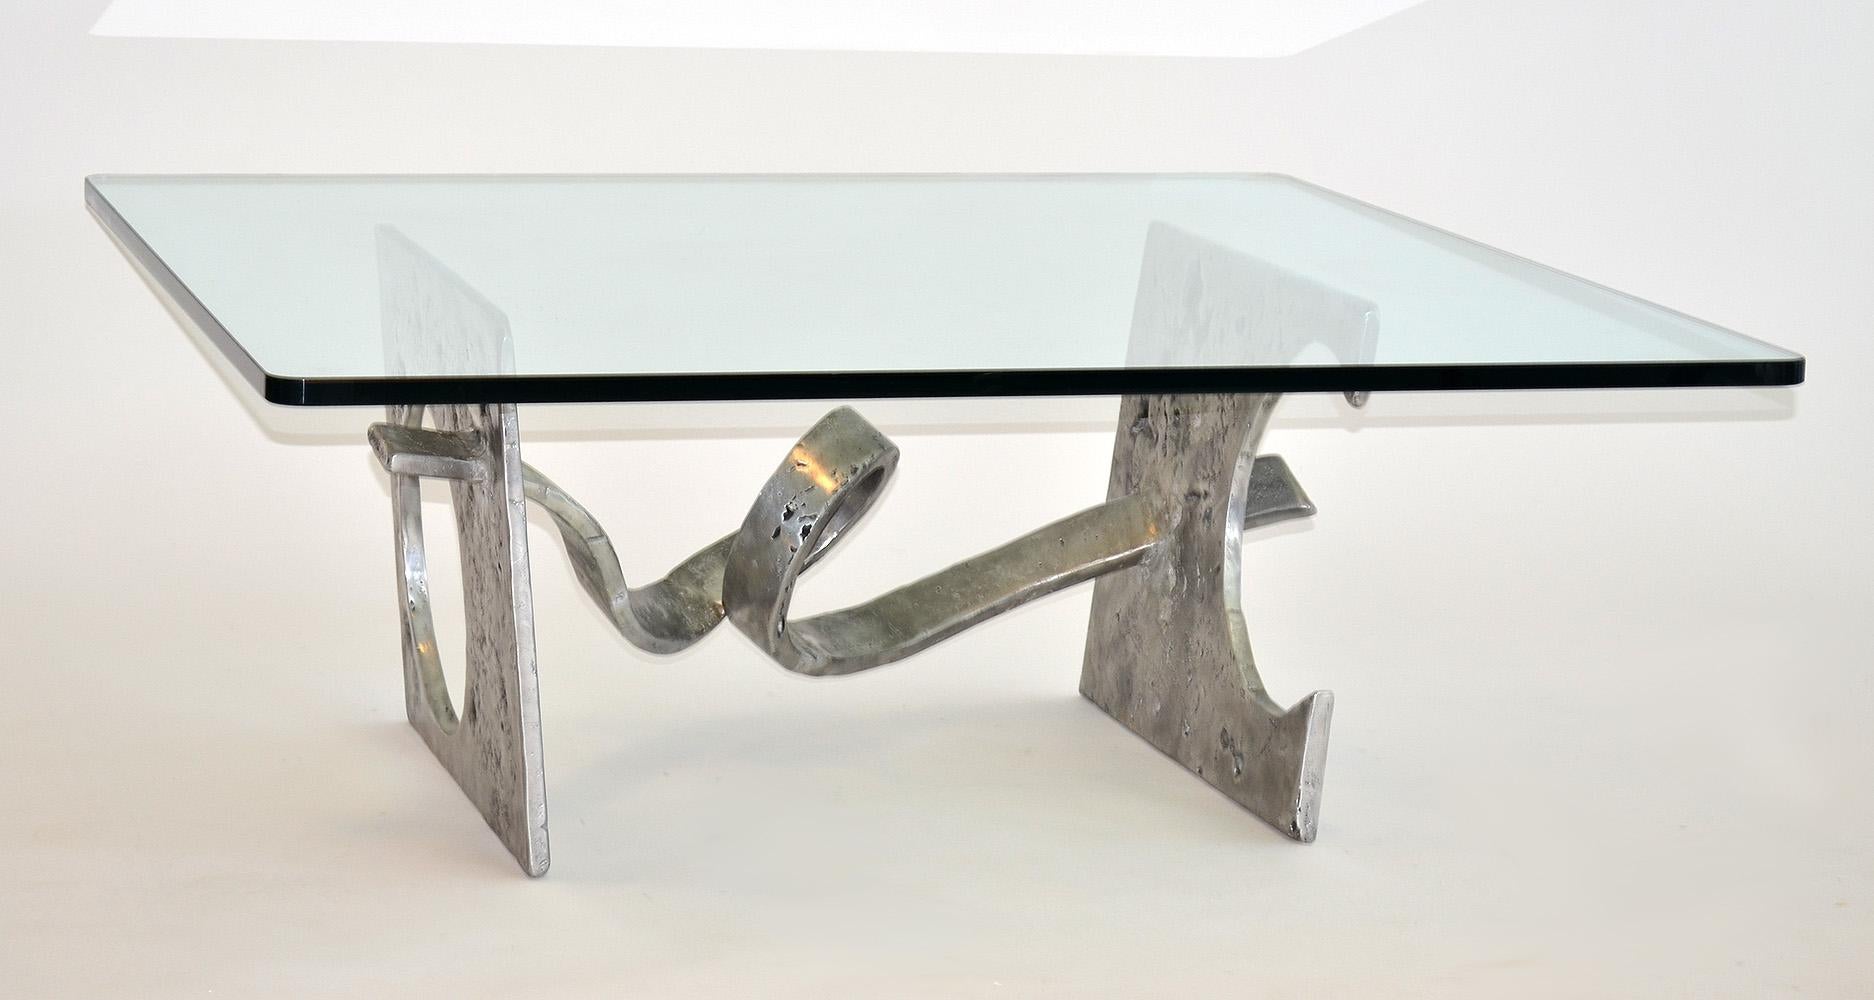 Signed Silas Seandel 'Knot' Cocktail Aluminum Coffee Table USA, 1970's
Signed Silas Seandel 'Knot